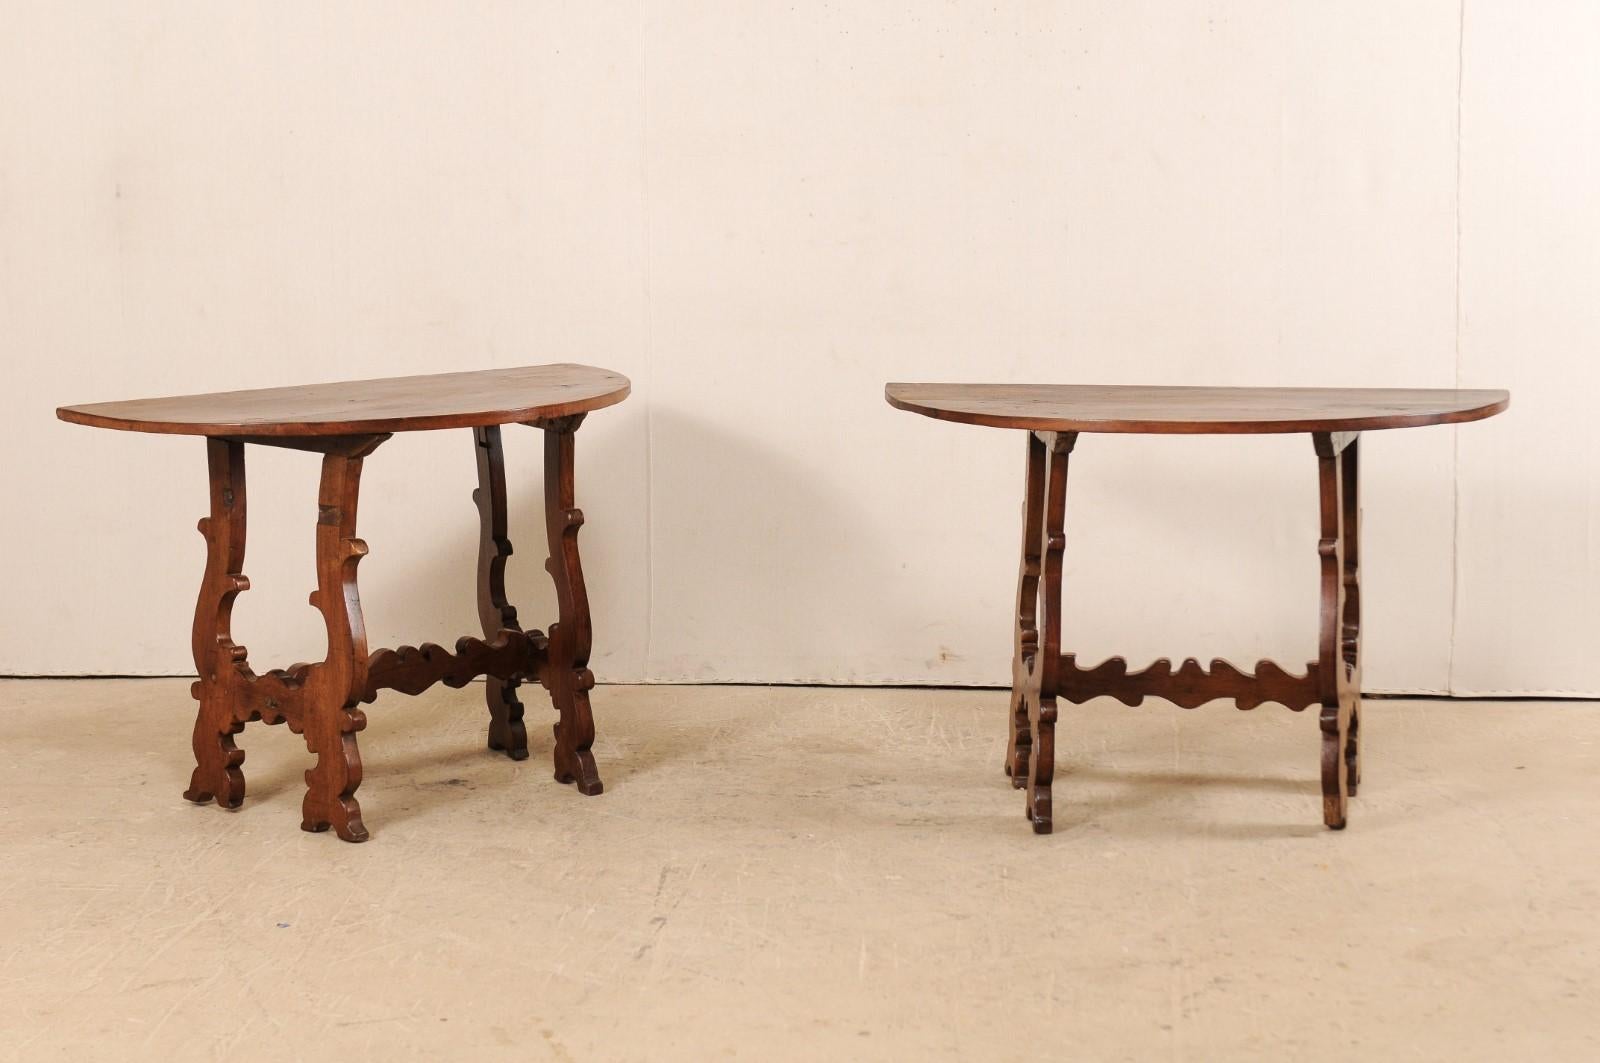 An Italian pair of walnut wood demilune consoles with lyre-legs from the 19th century. This pair of antique tables from Italy each feature half-moon shaped top which is raised upon a pair of sinuously carved and canted lyre-legs. The lyre legs are